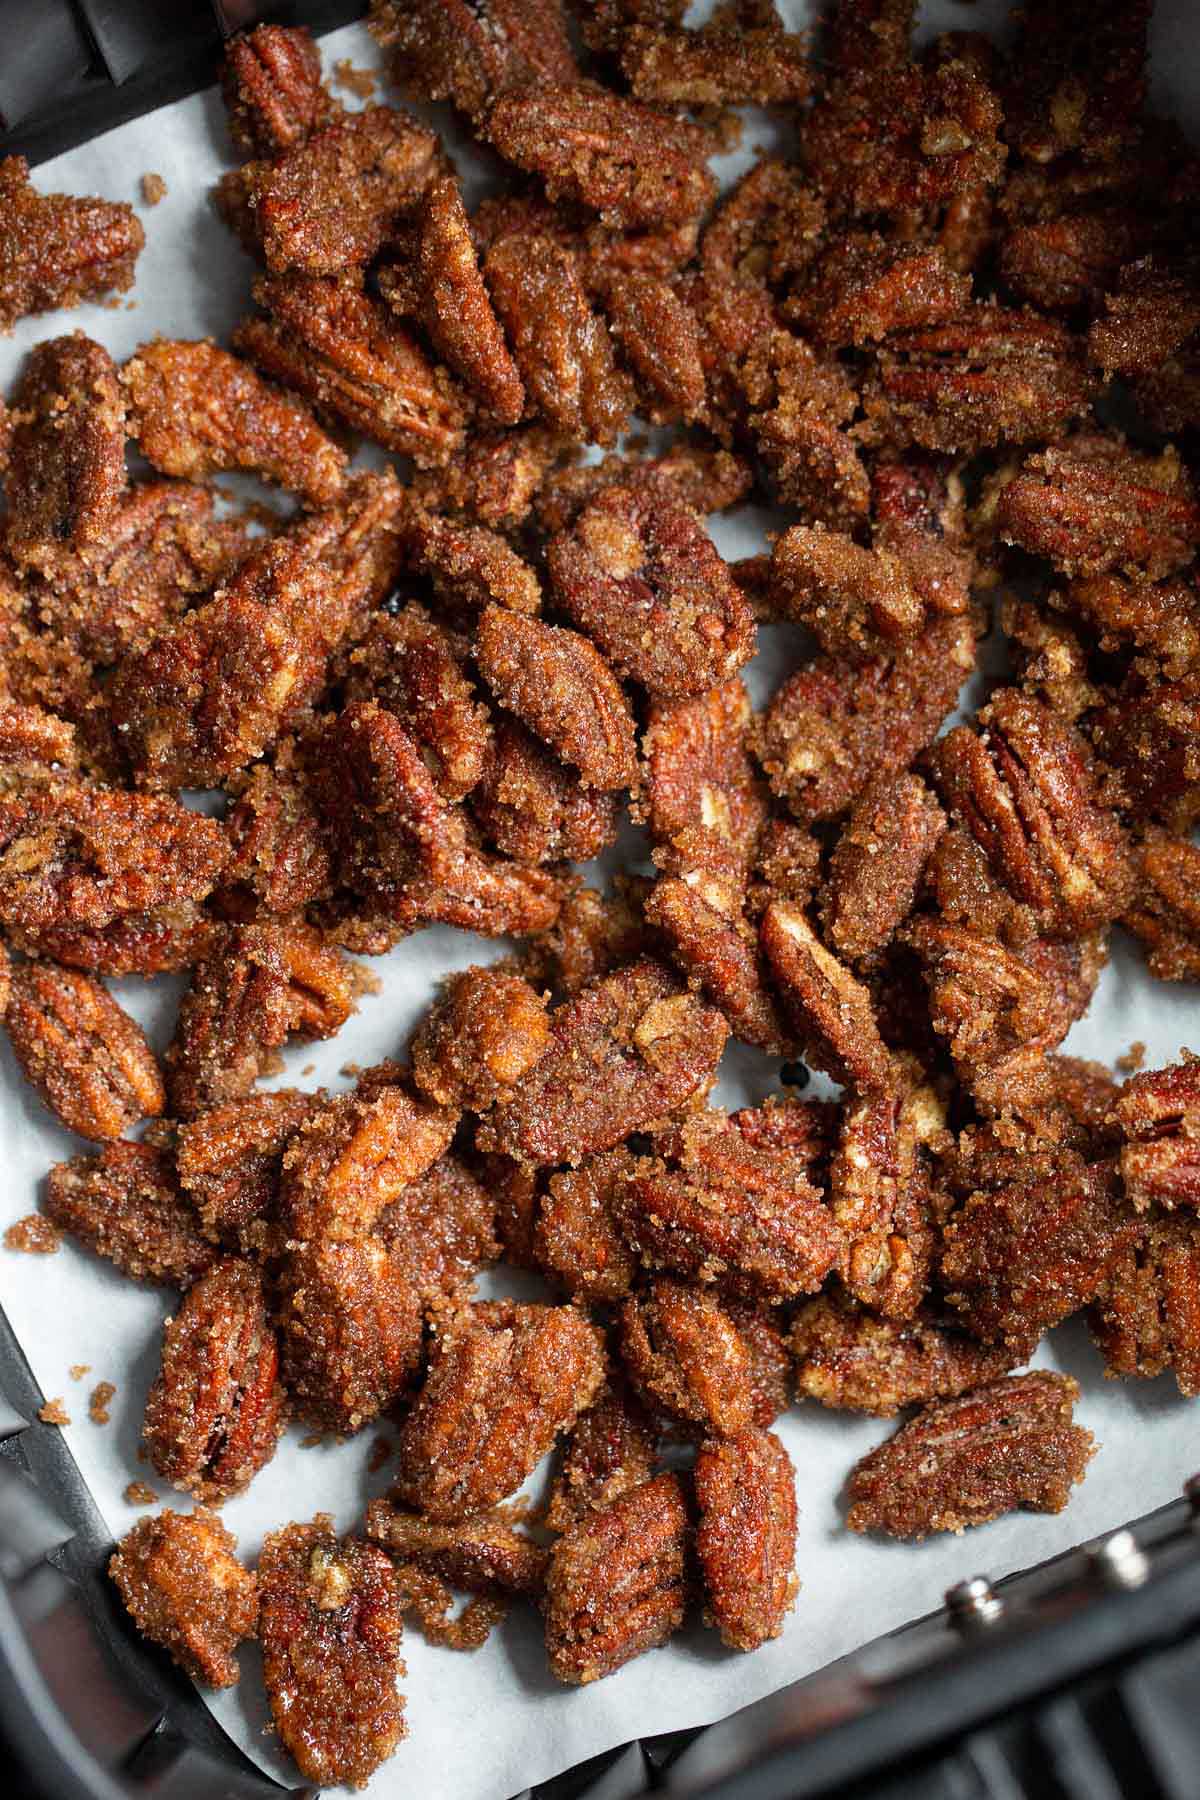 Uncooked candied pecans in air fryer basket.